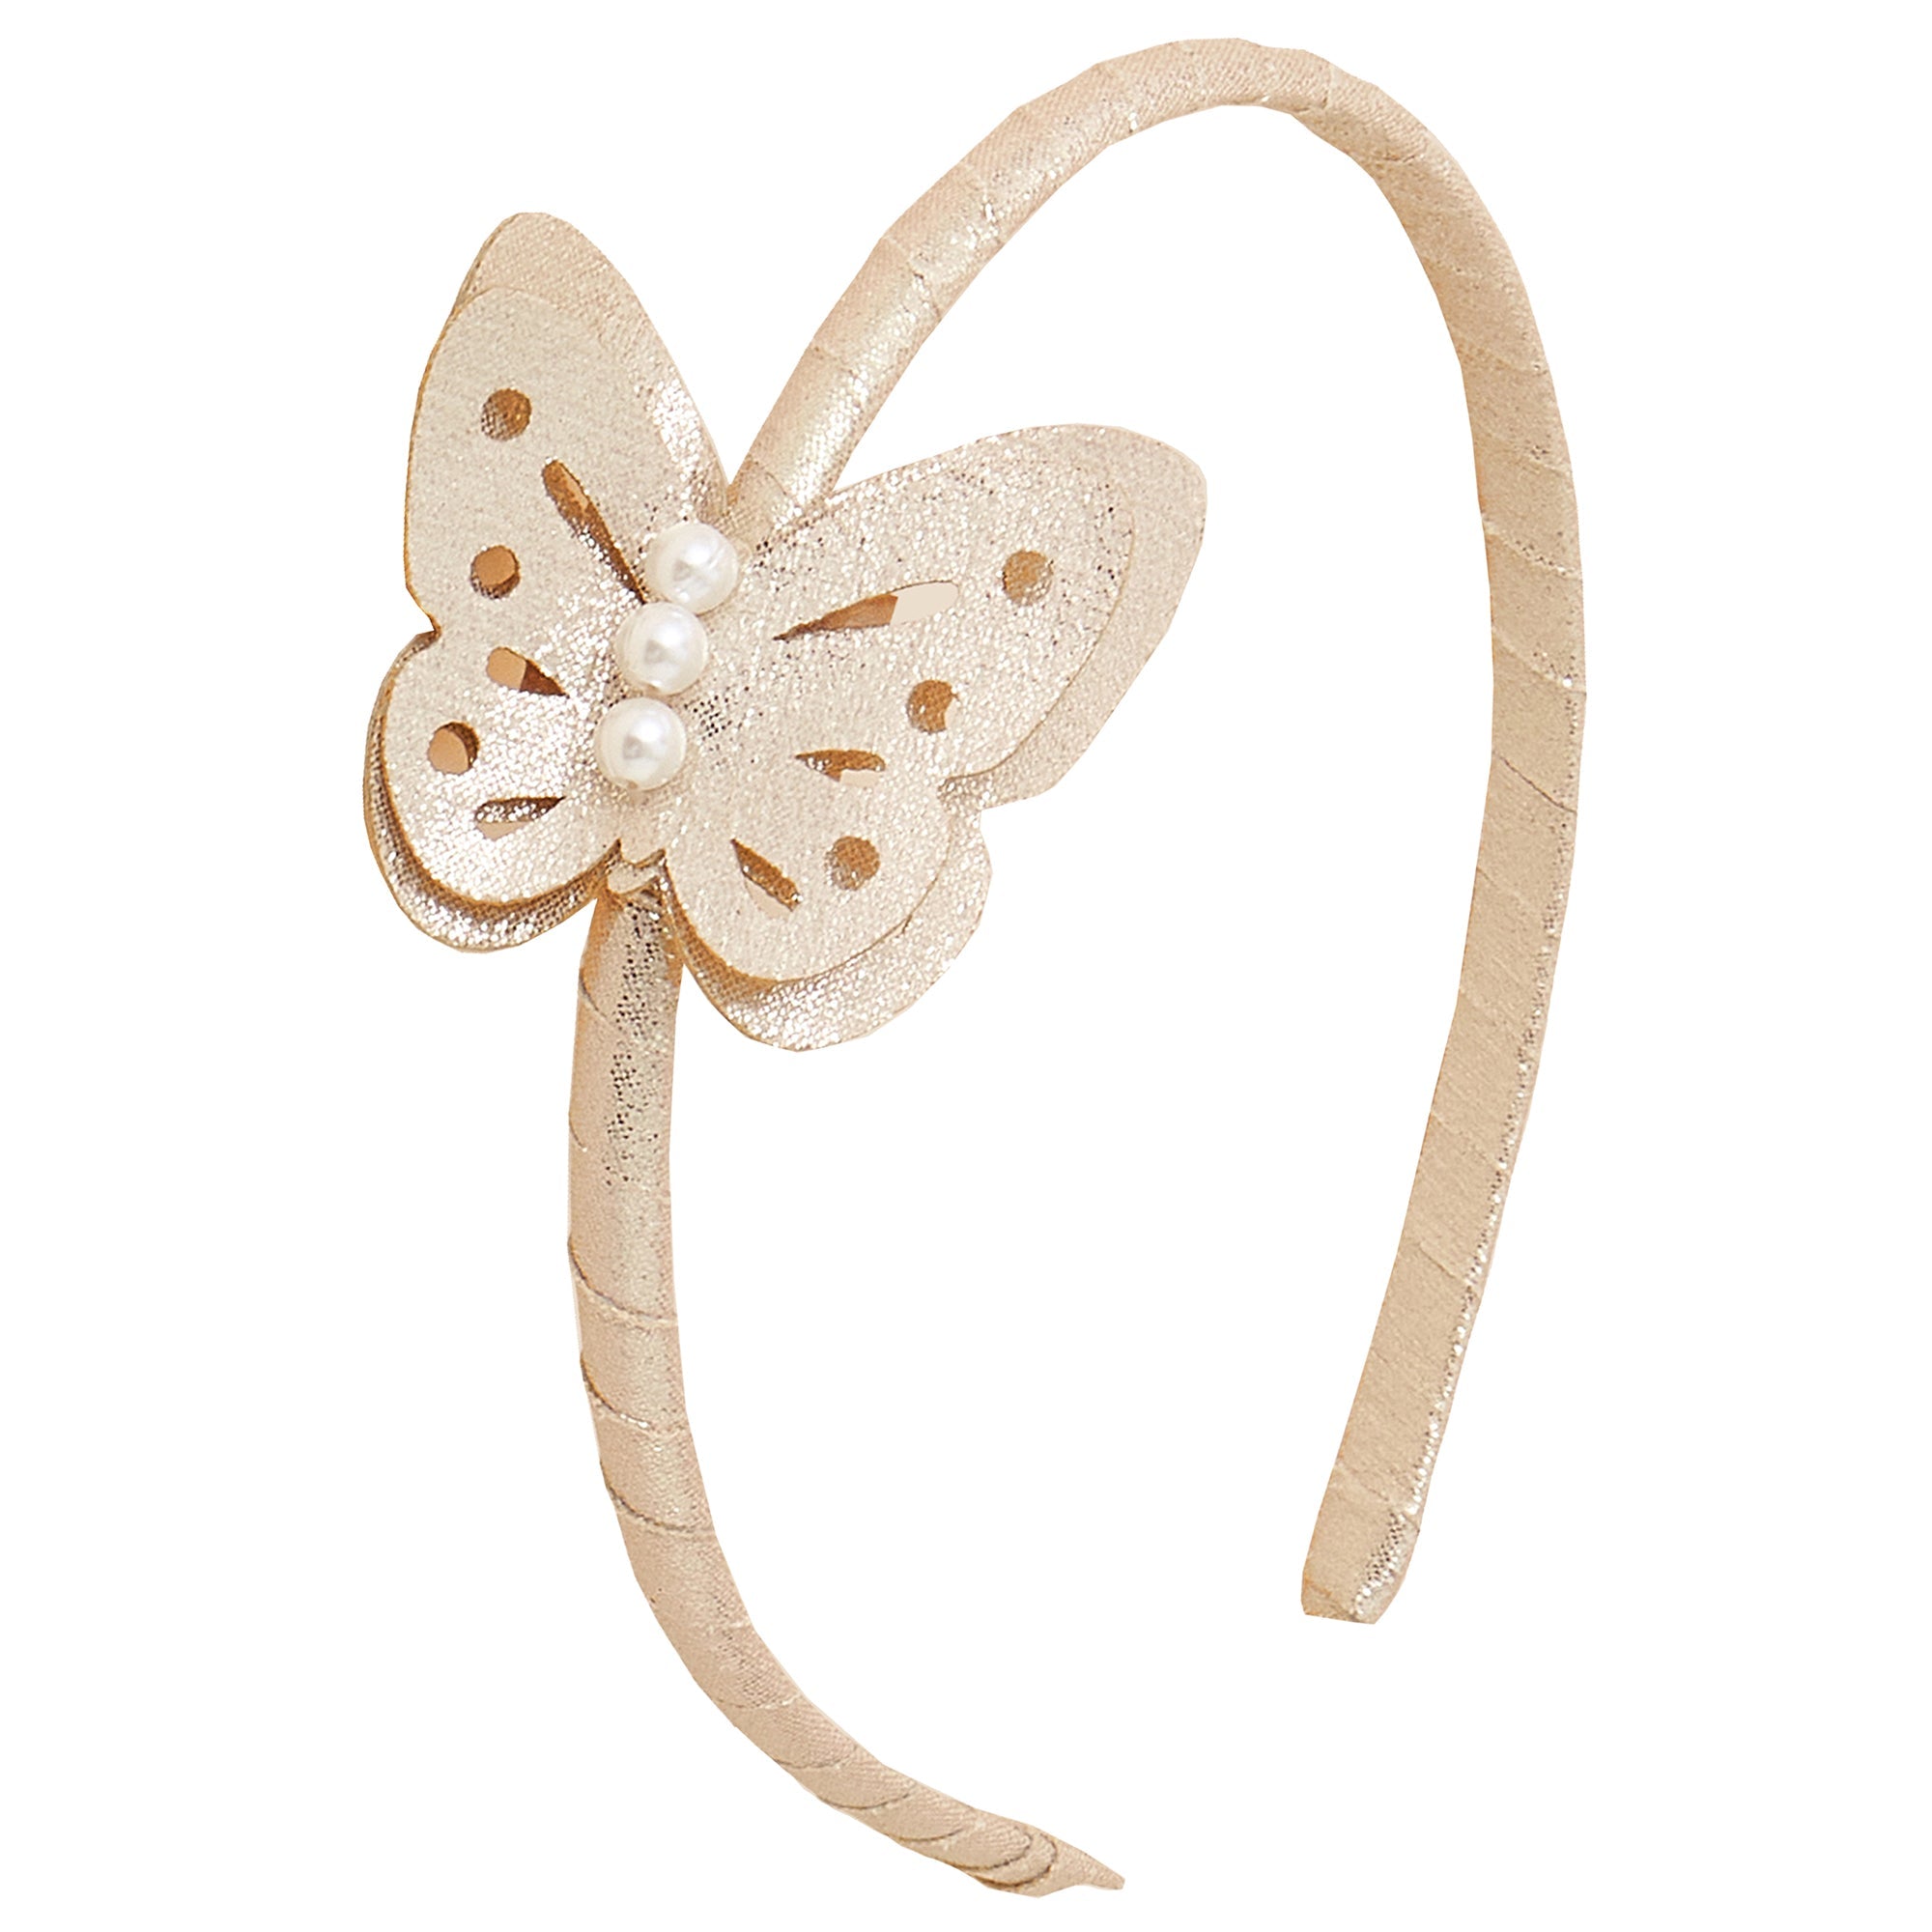 Accessorize London Girl's R Butterfly Alice Band